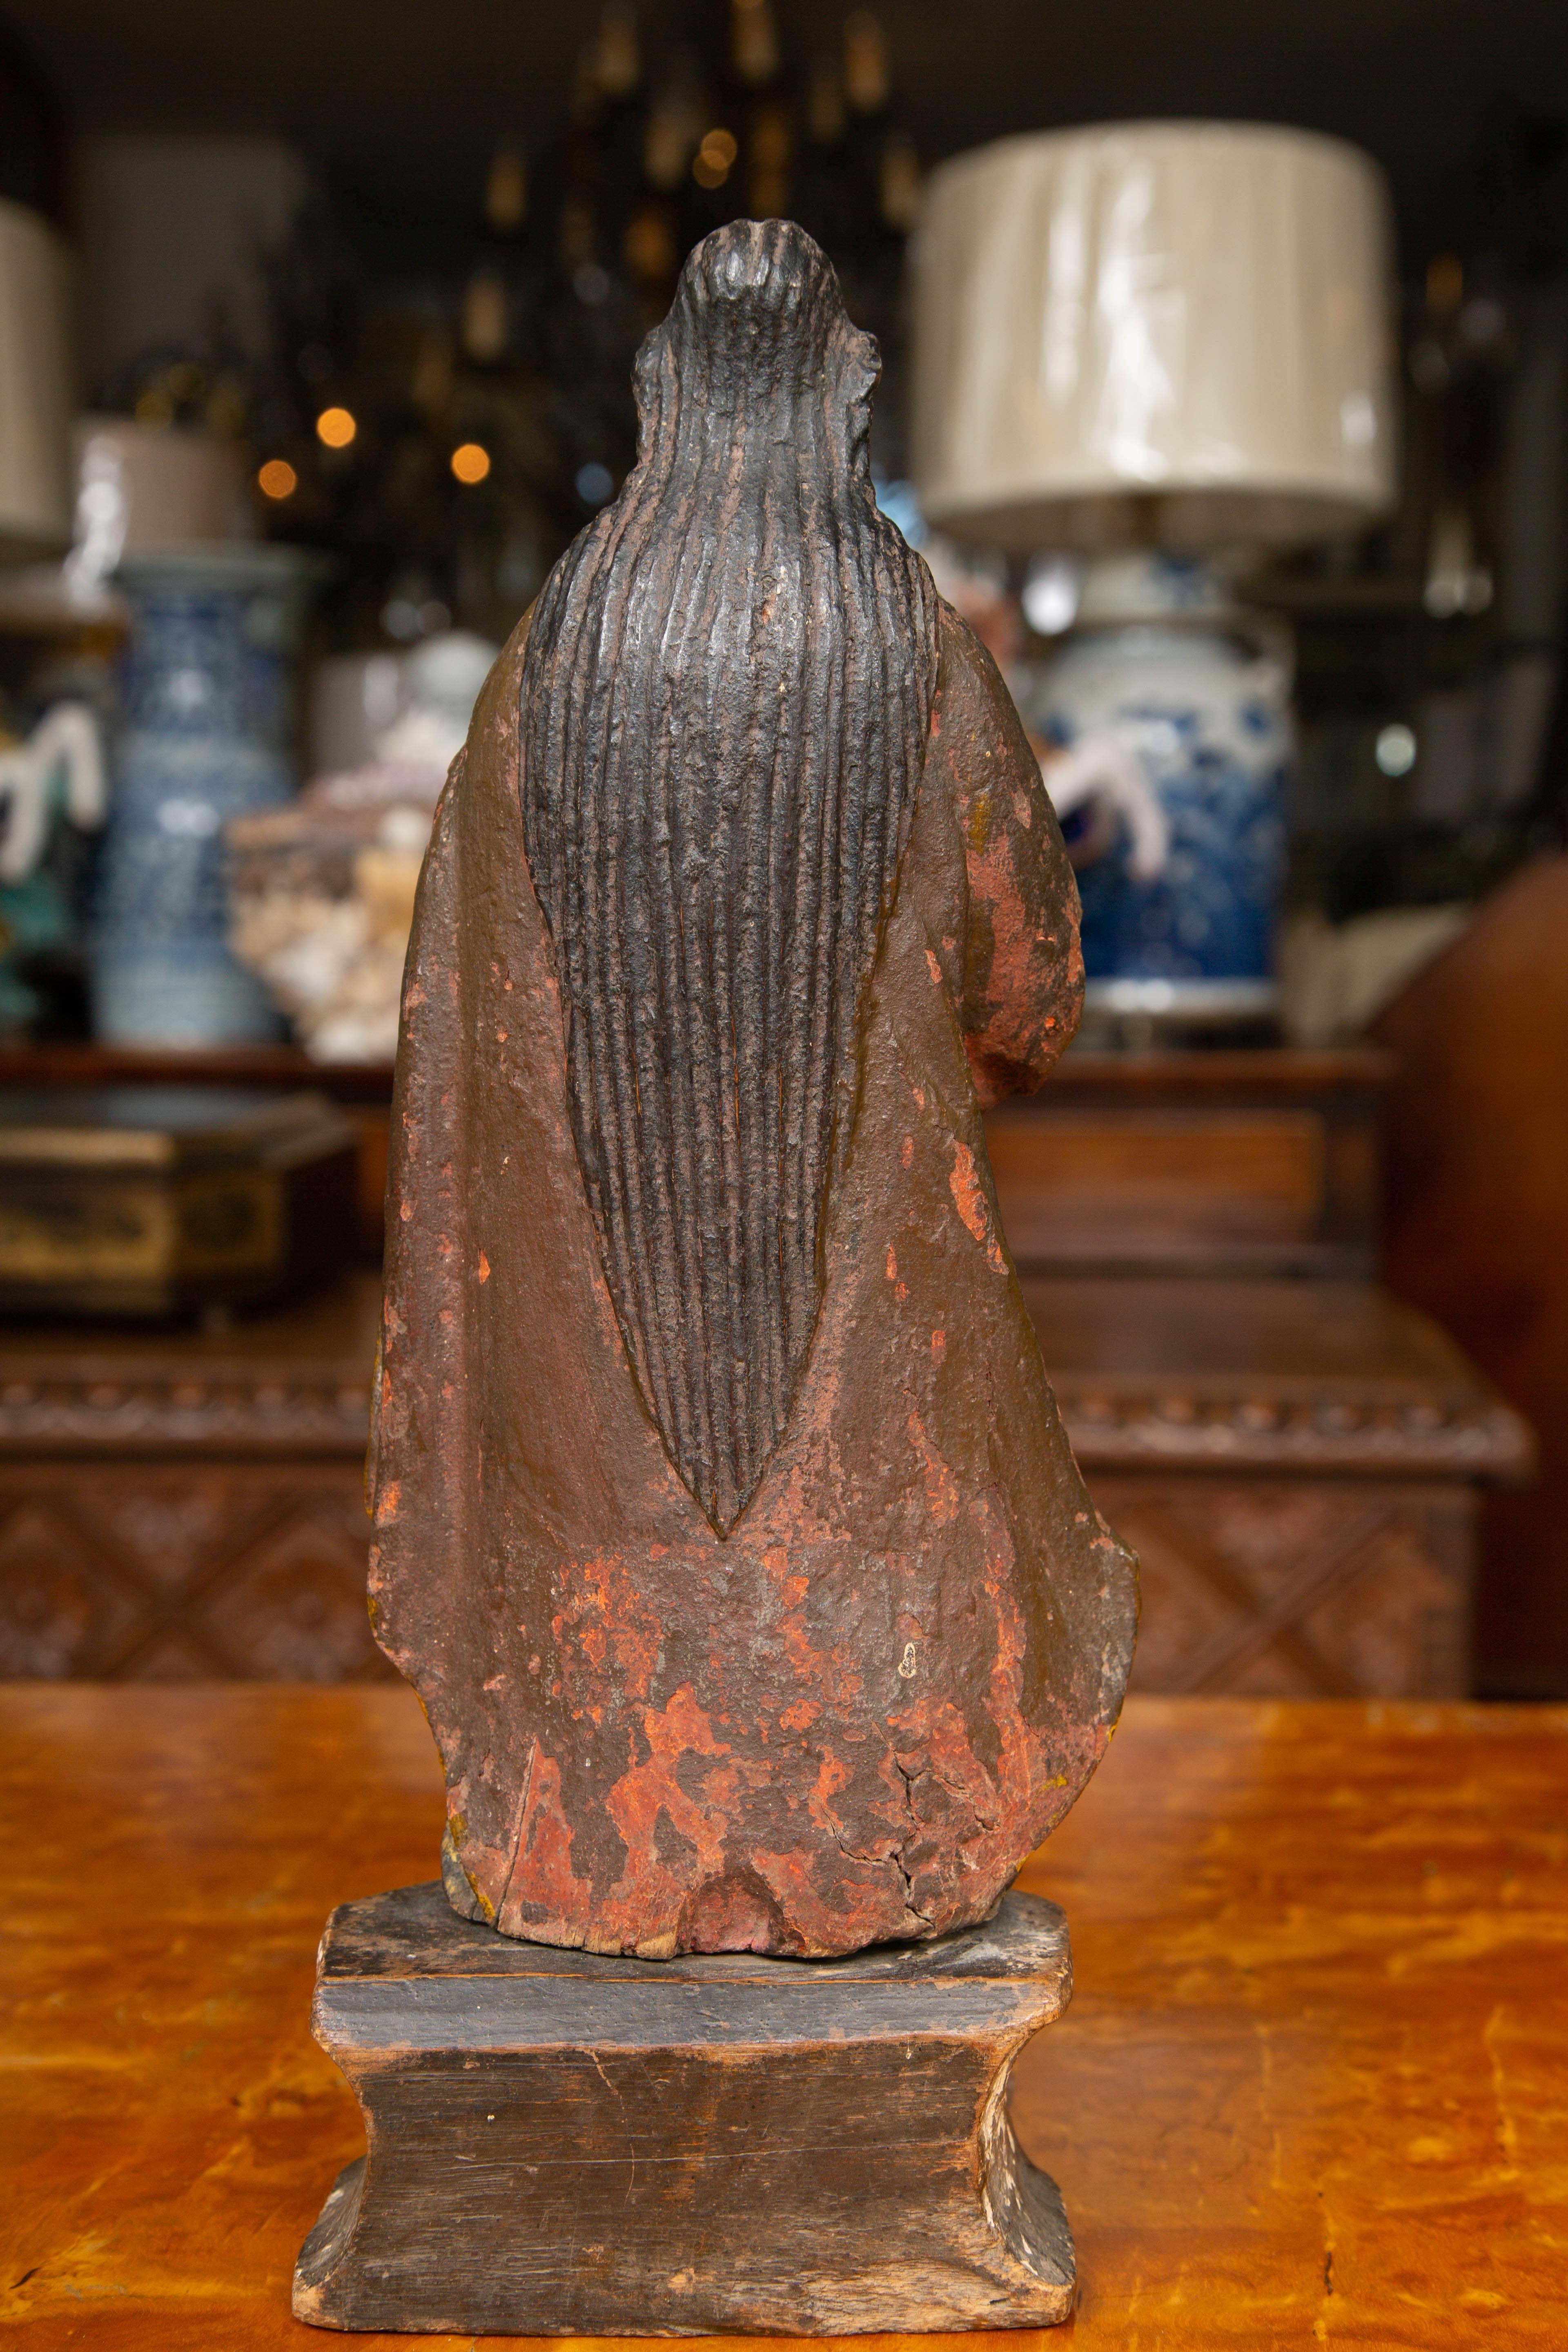 This is a polychromed hand carved figure of a religious figure. The saint is garbed in a flowing robe standing on a pedestal. The polychromed finish is a mixture of blues, yellow, whites and muted red. The naturally worn and patinated finish offers